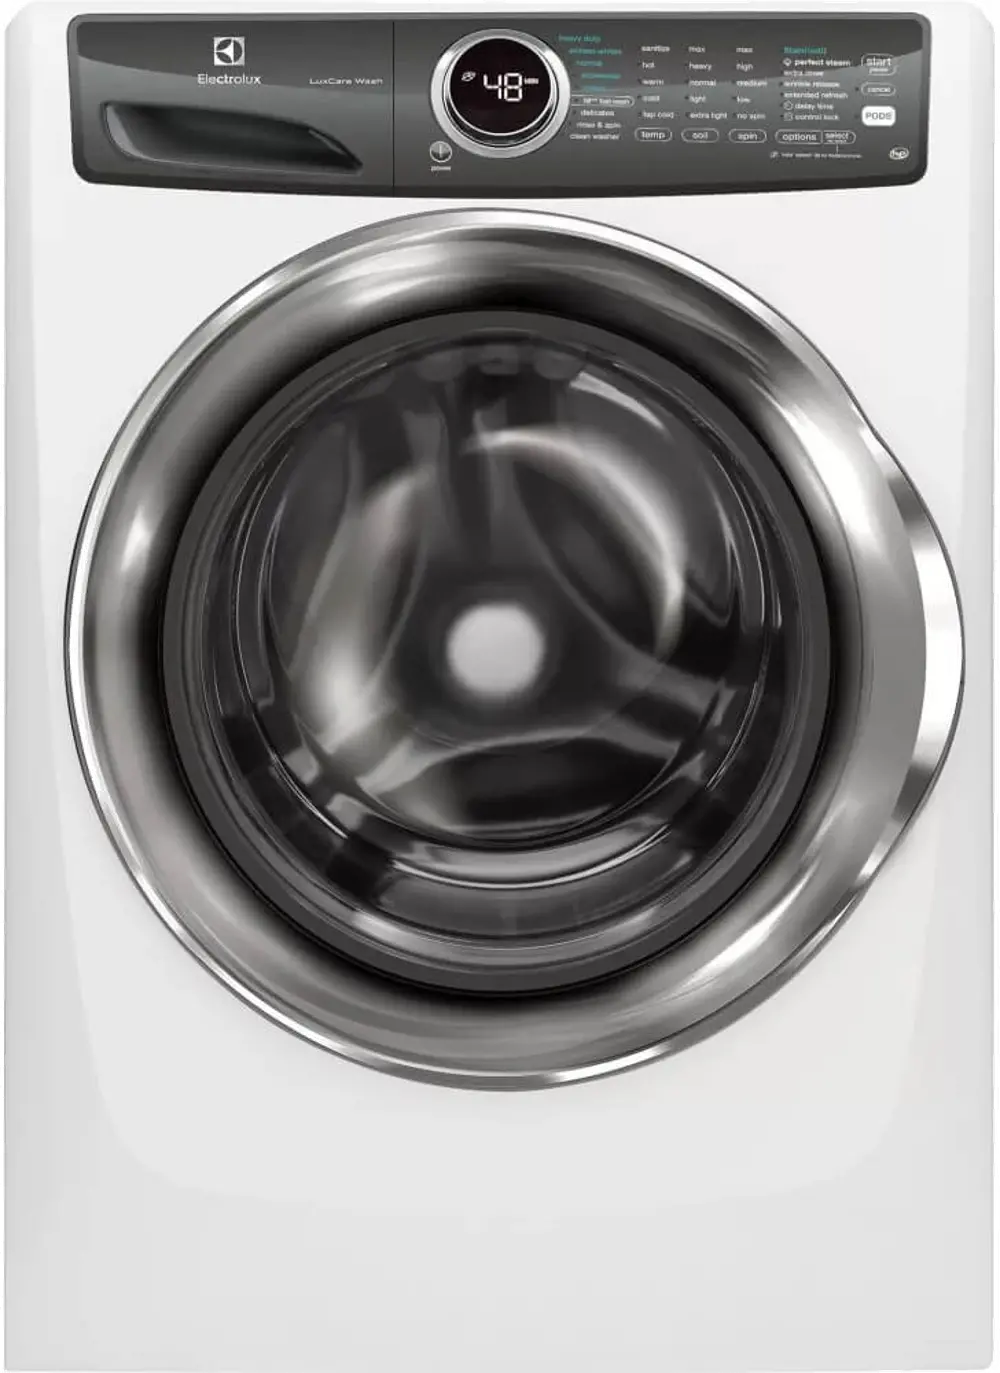 EFLS527UIW Electrolux Front Load Washer with Adaptive Dispenser - 4.3 cu. ft. White-1